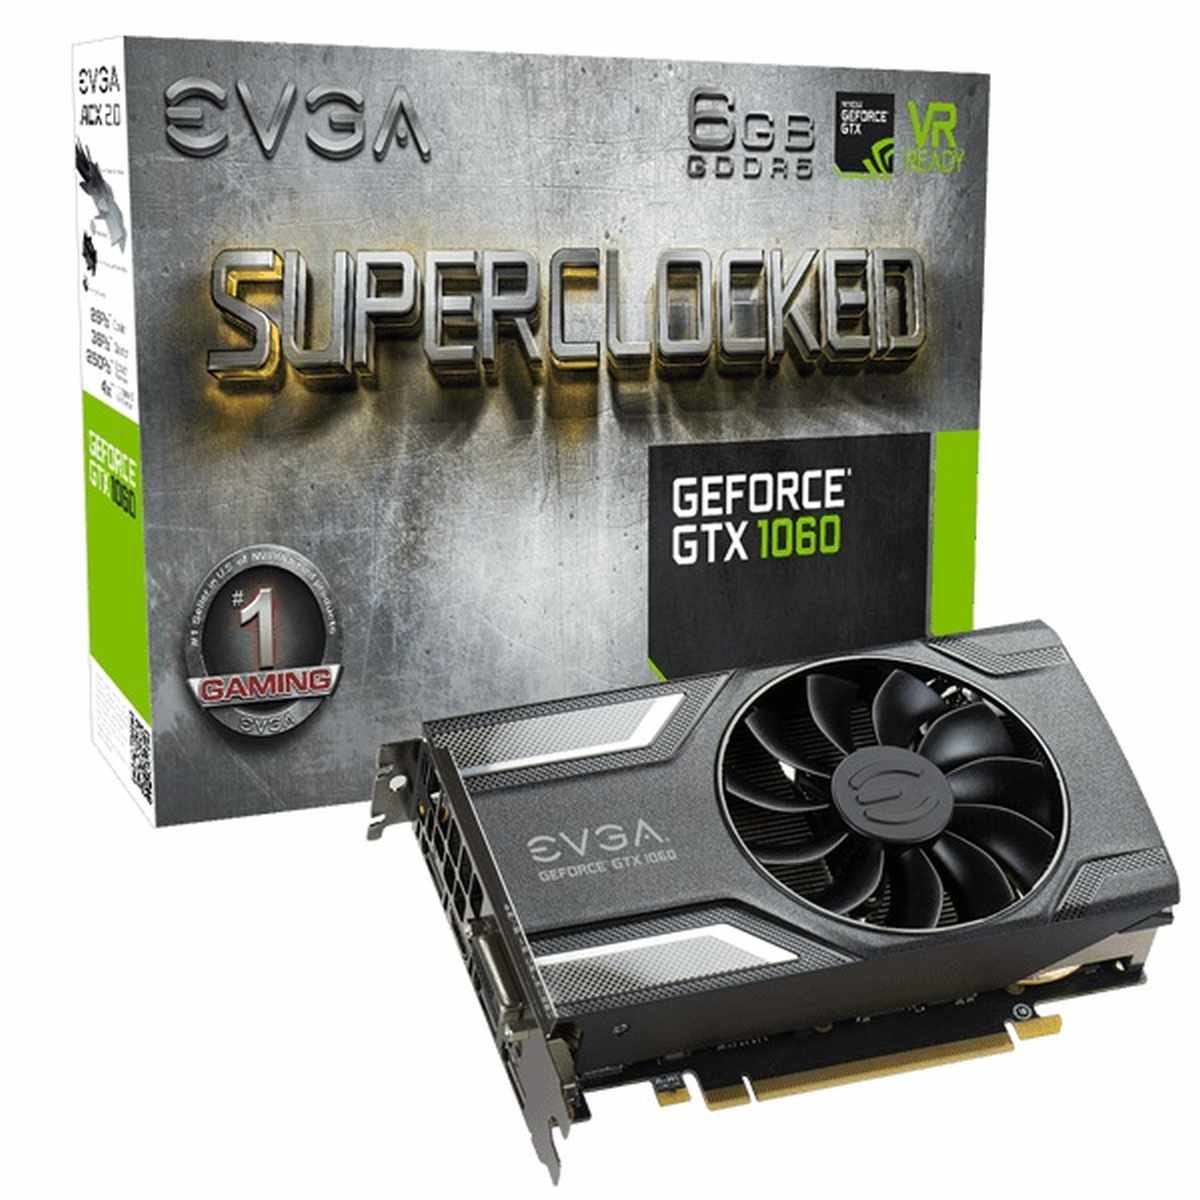 EVGA GeForce GTX 1060 SC Gaming | Best Graphics Cards For Gaming